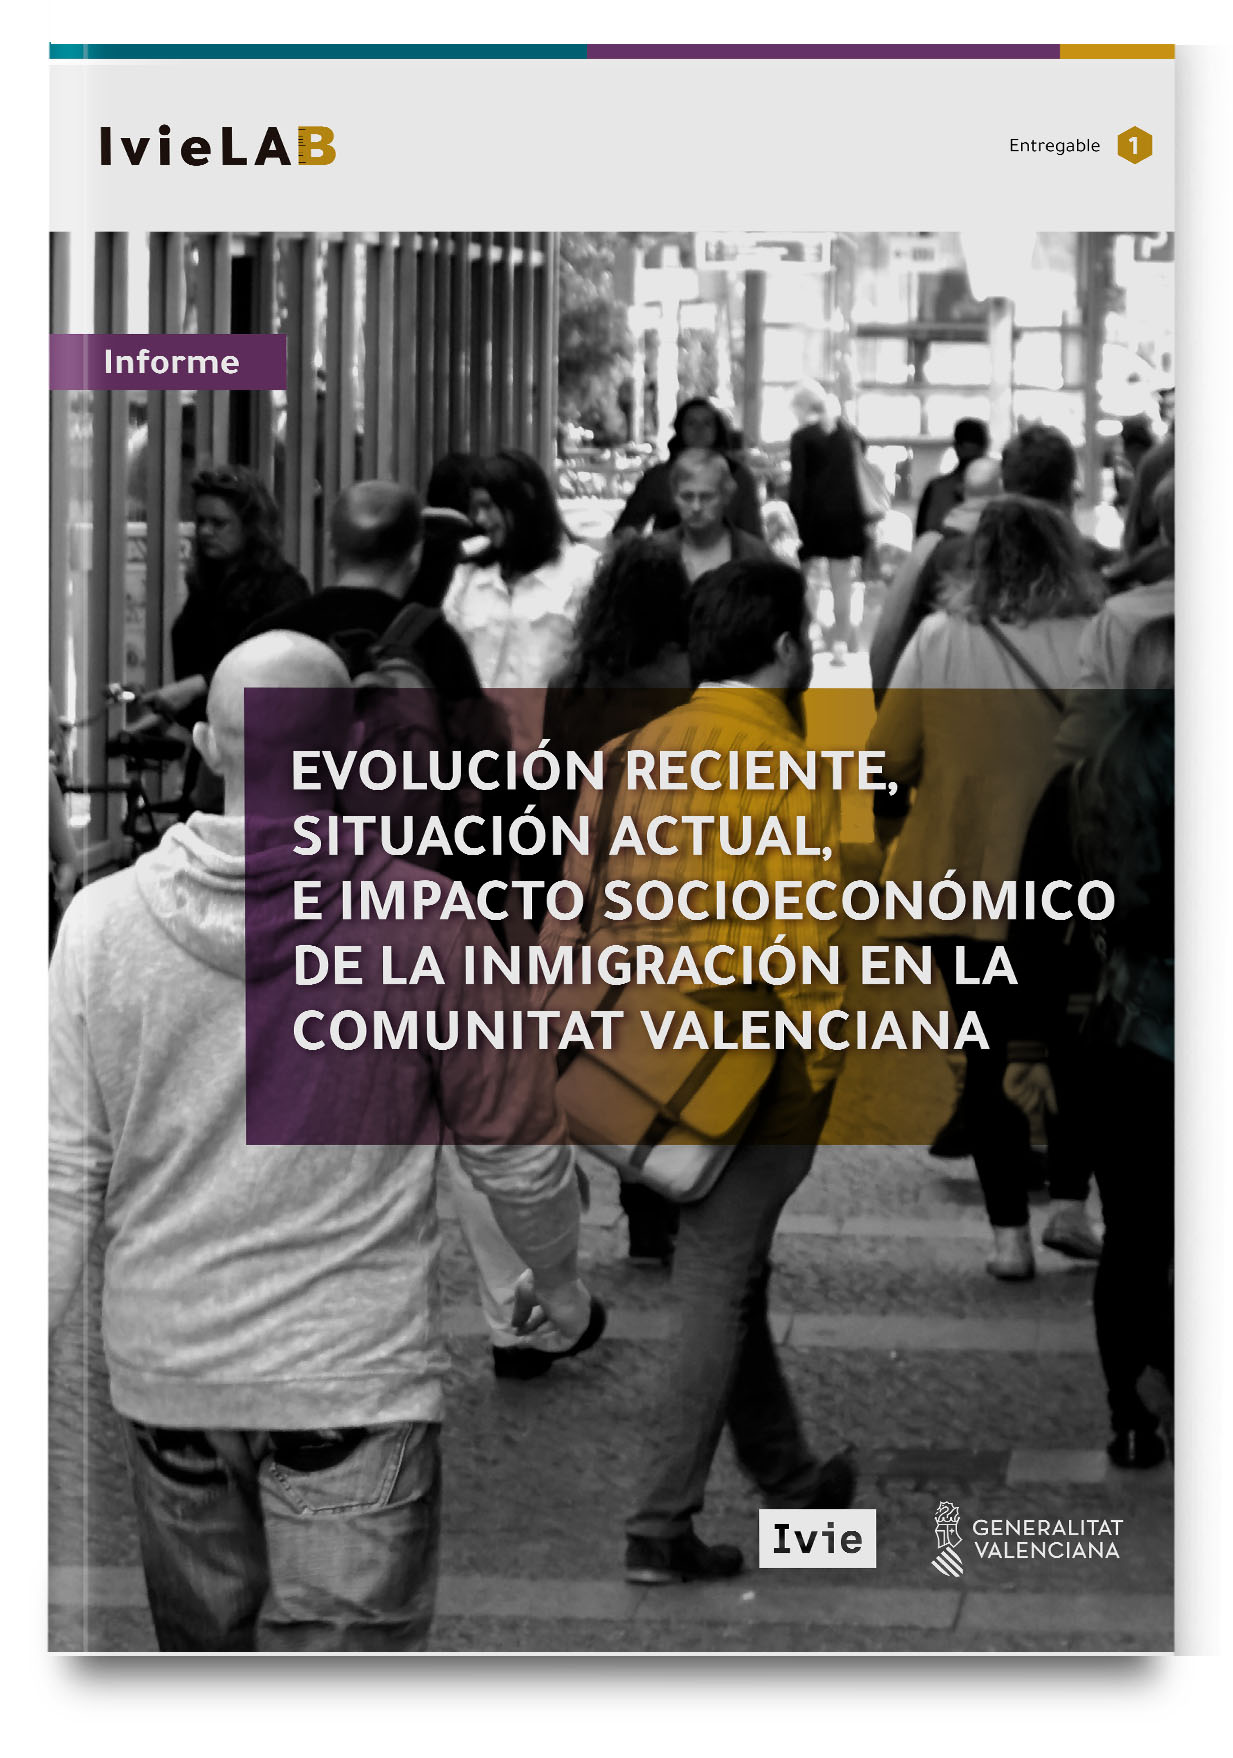 IvieLAB. Recent developments, current situation and socio-economic impact of immigration in the Valencian Community